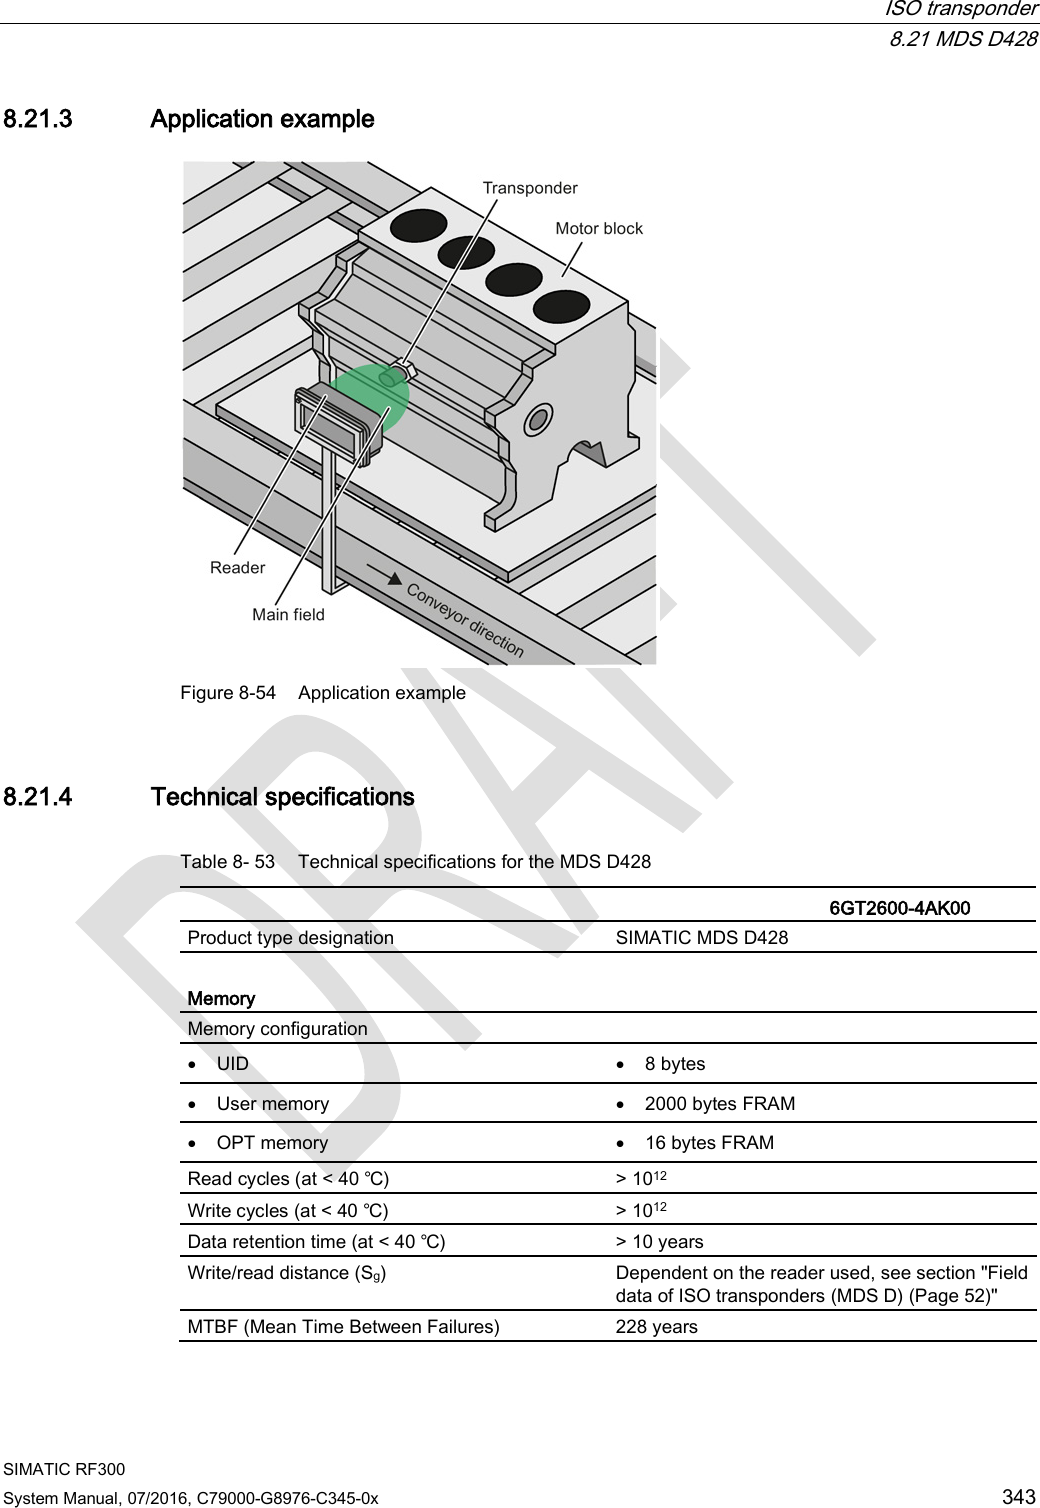  ISO transponder  8.21 MDS D428 SIMATIC RF300 System Manual, 07/2016, C79000-G8976-C345-0x 343 8.21.3 Application example  Figure 8-54 Application example 8.21.4 Technical specifications Table 8- 53 Technical specifications for the MDS D428    6GT2600-4AK00  Product type designation SIMATIC MDS D428  Memory Memory configuration   • UID • 8 bytes • User memory • 2000 bytes FRAM • OPT memory • 16 bytes FRAM Read cycles (at &lt; 40 ℃) &gt; 1012 Write cycles (at &lt; 40 ℃) &gt; 1012 Data retention time (at &lt; 40 ℃) &gt; 10 years Write/read distance (Sg)  Dependent on the reader used, see section &quot;Field data of ISO transponders (MDS D) (Page 52)&quot; MTBF (Mean Time Between Failures) 228 years 